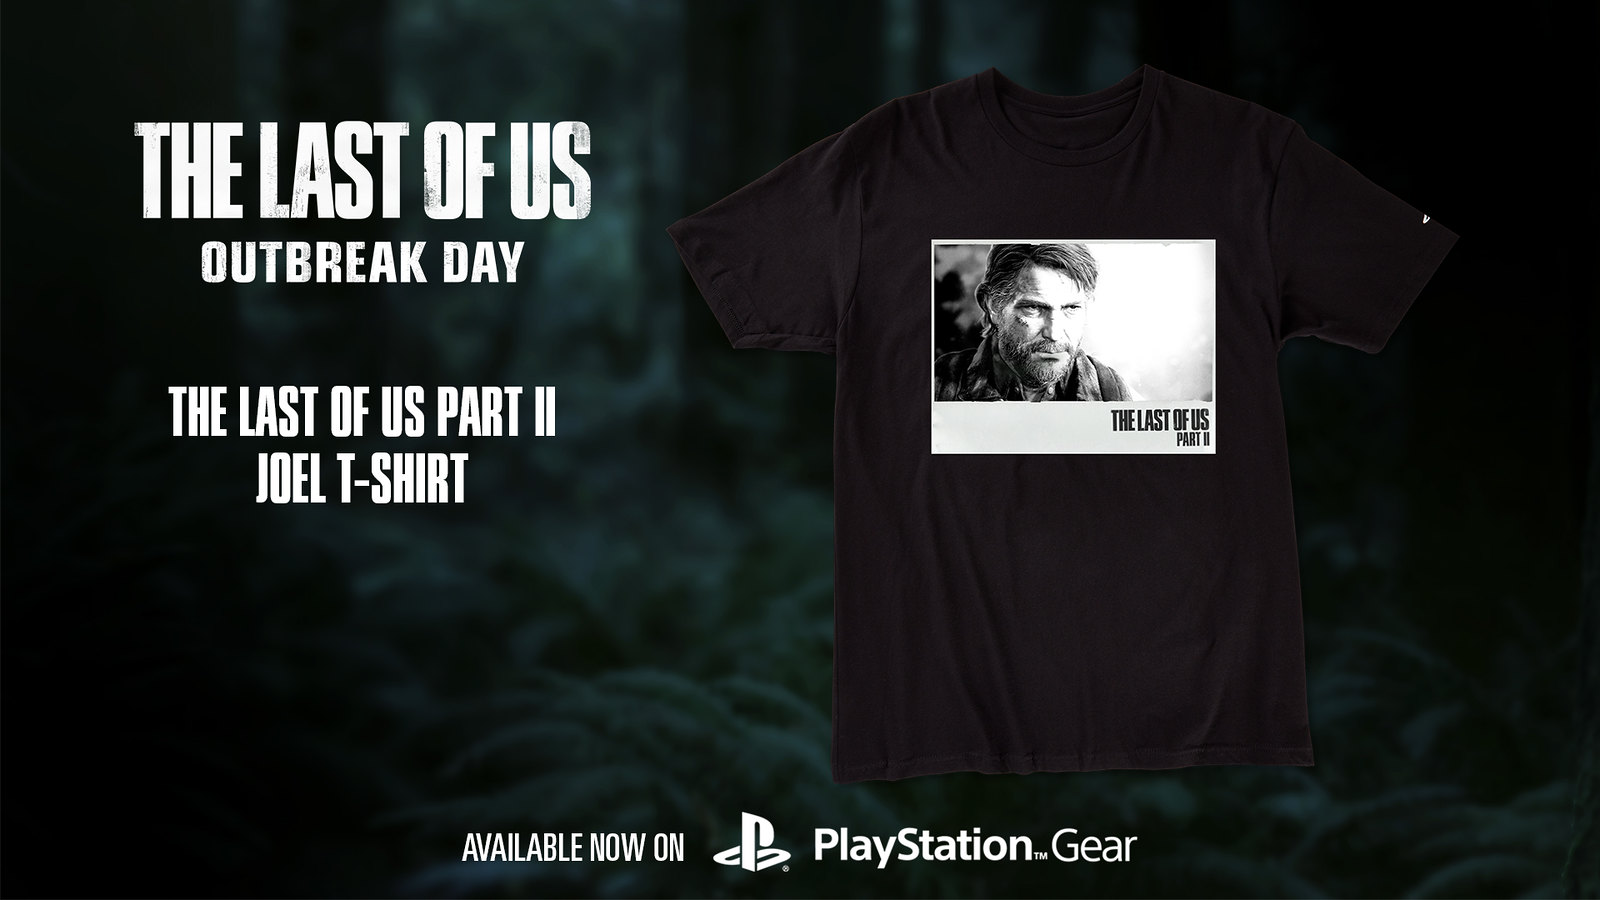 The Last of Us Part II - Outbreak Day